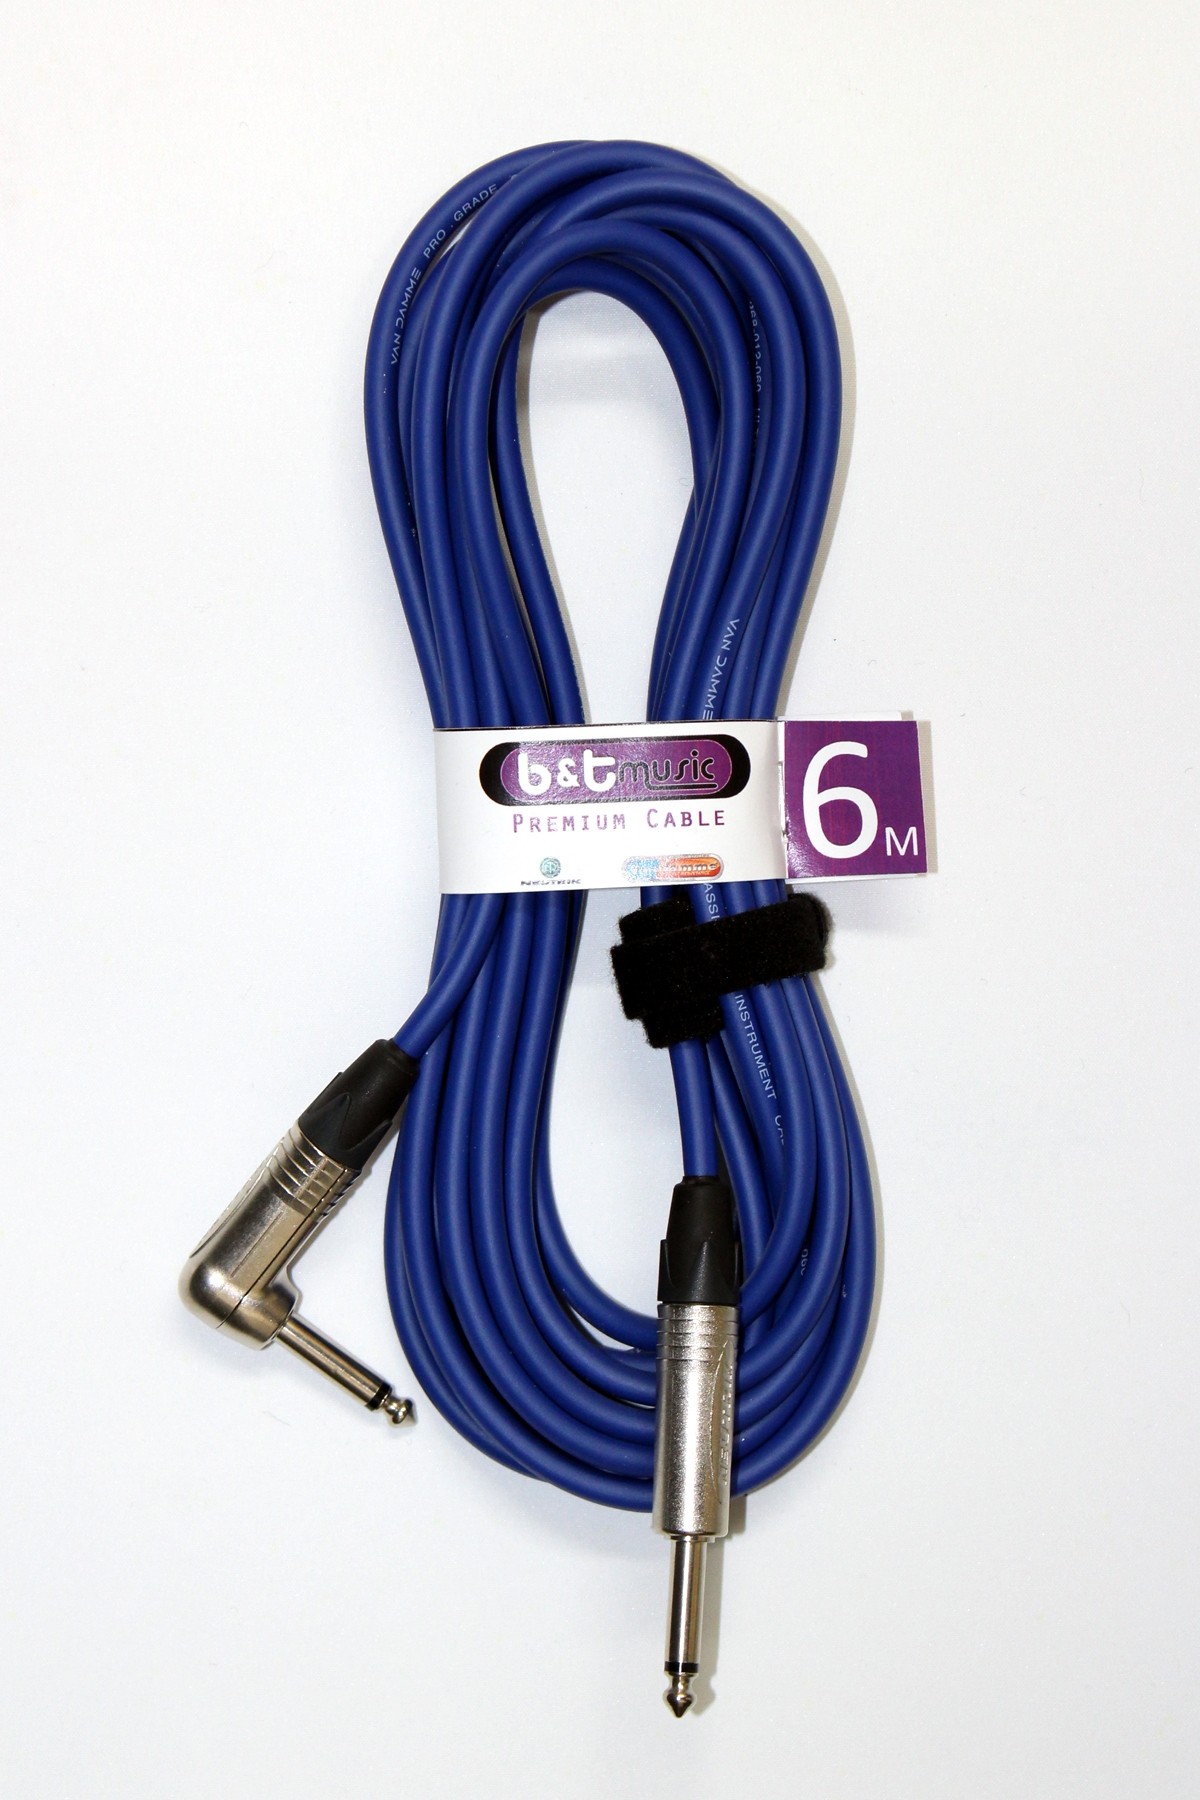 B&T Music Premium Cable 6m Jack To Angle Jack - Blue